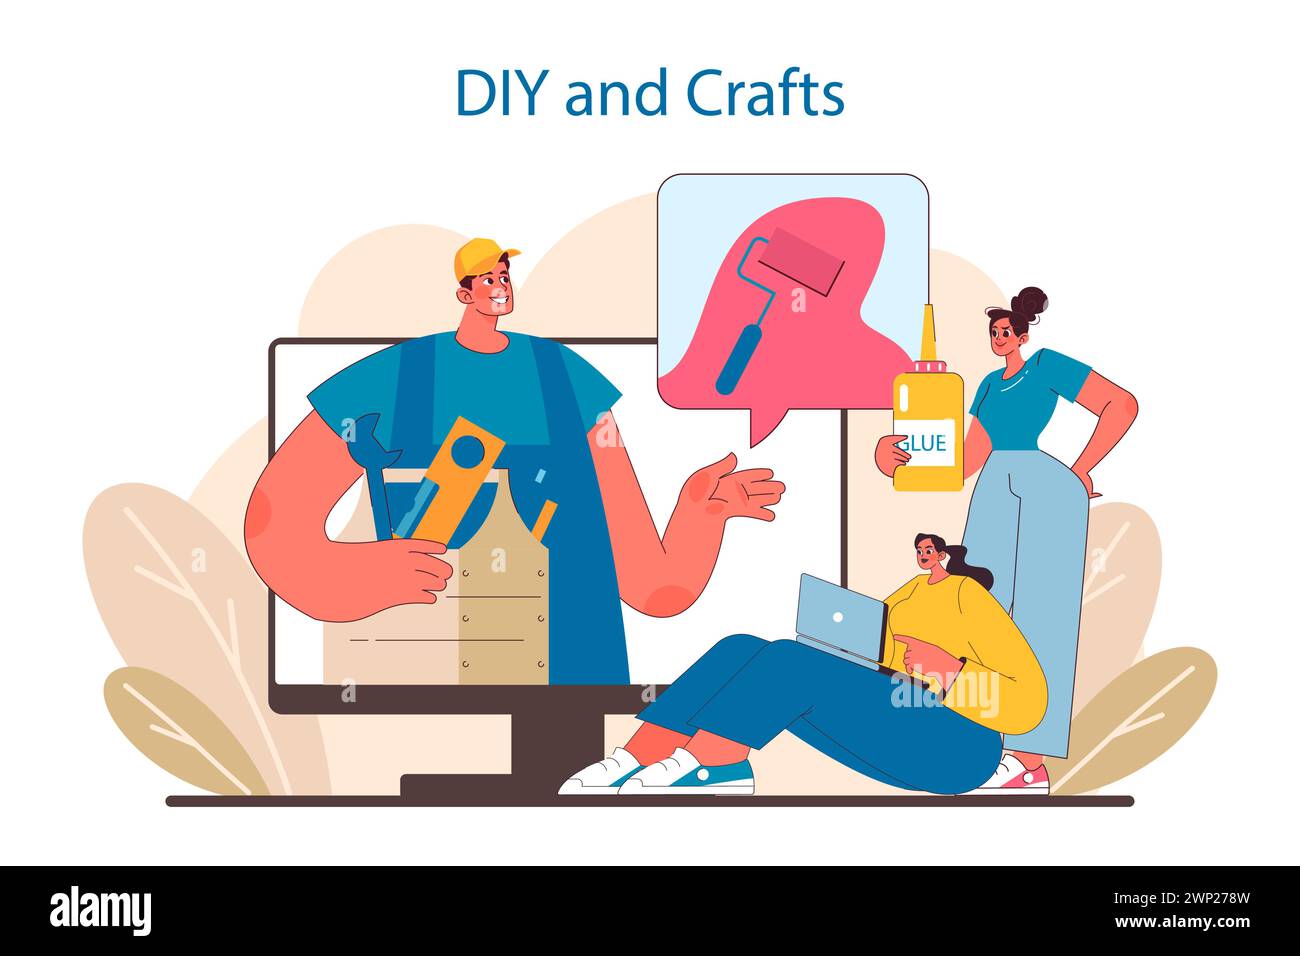 DIY and Crafts concept. Home projects and creative hobbies showcased online. Crafting community sharing inspiration and how-to guides. Celebrating handiwork and ingenuity. Flat vector illustration. Stock Vector